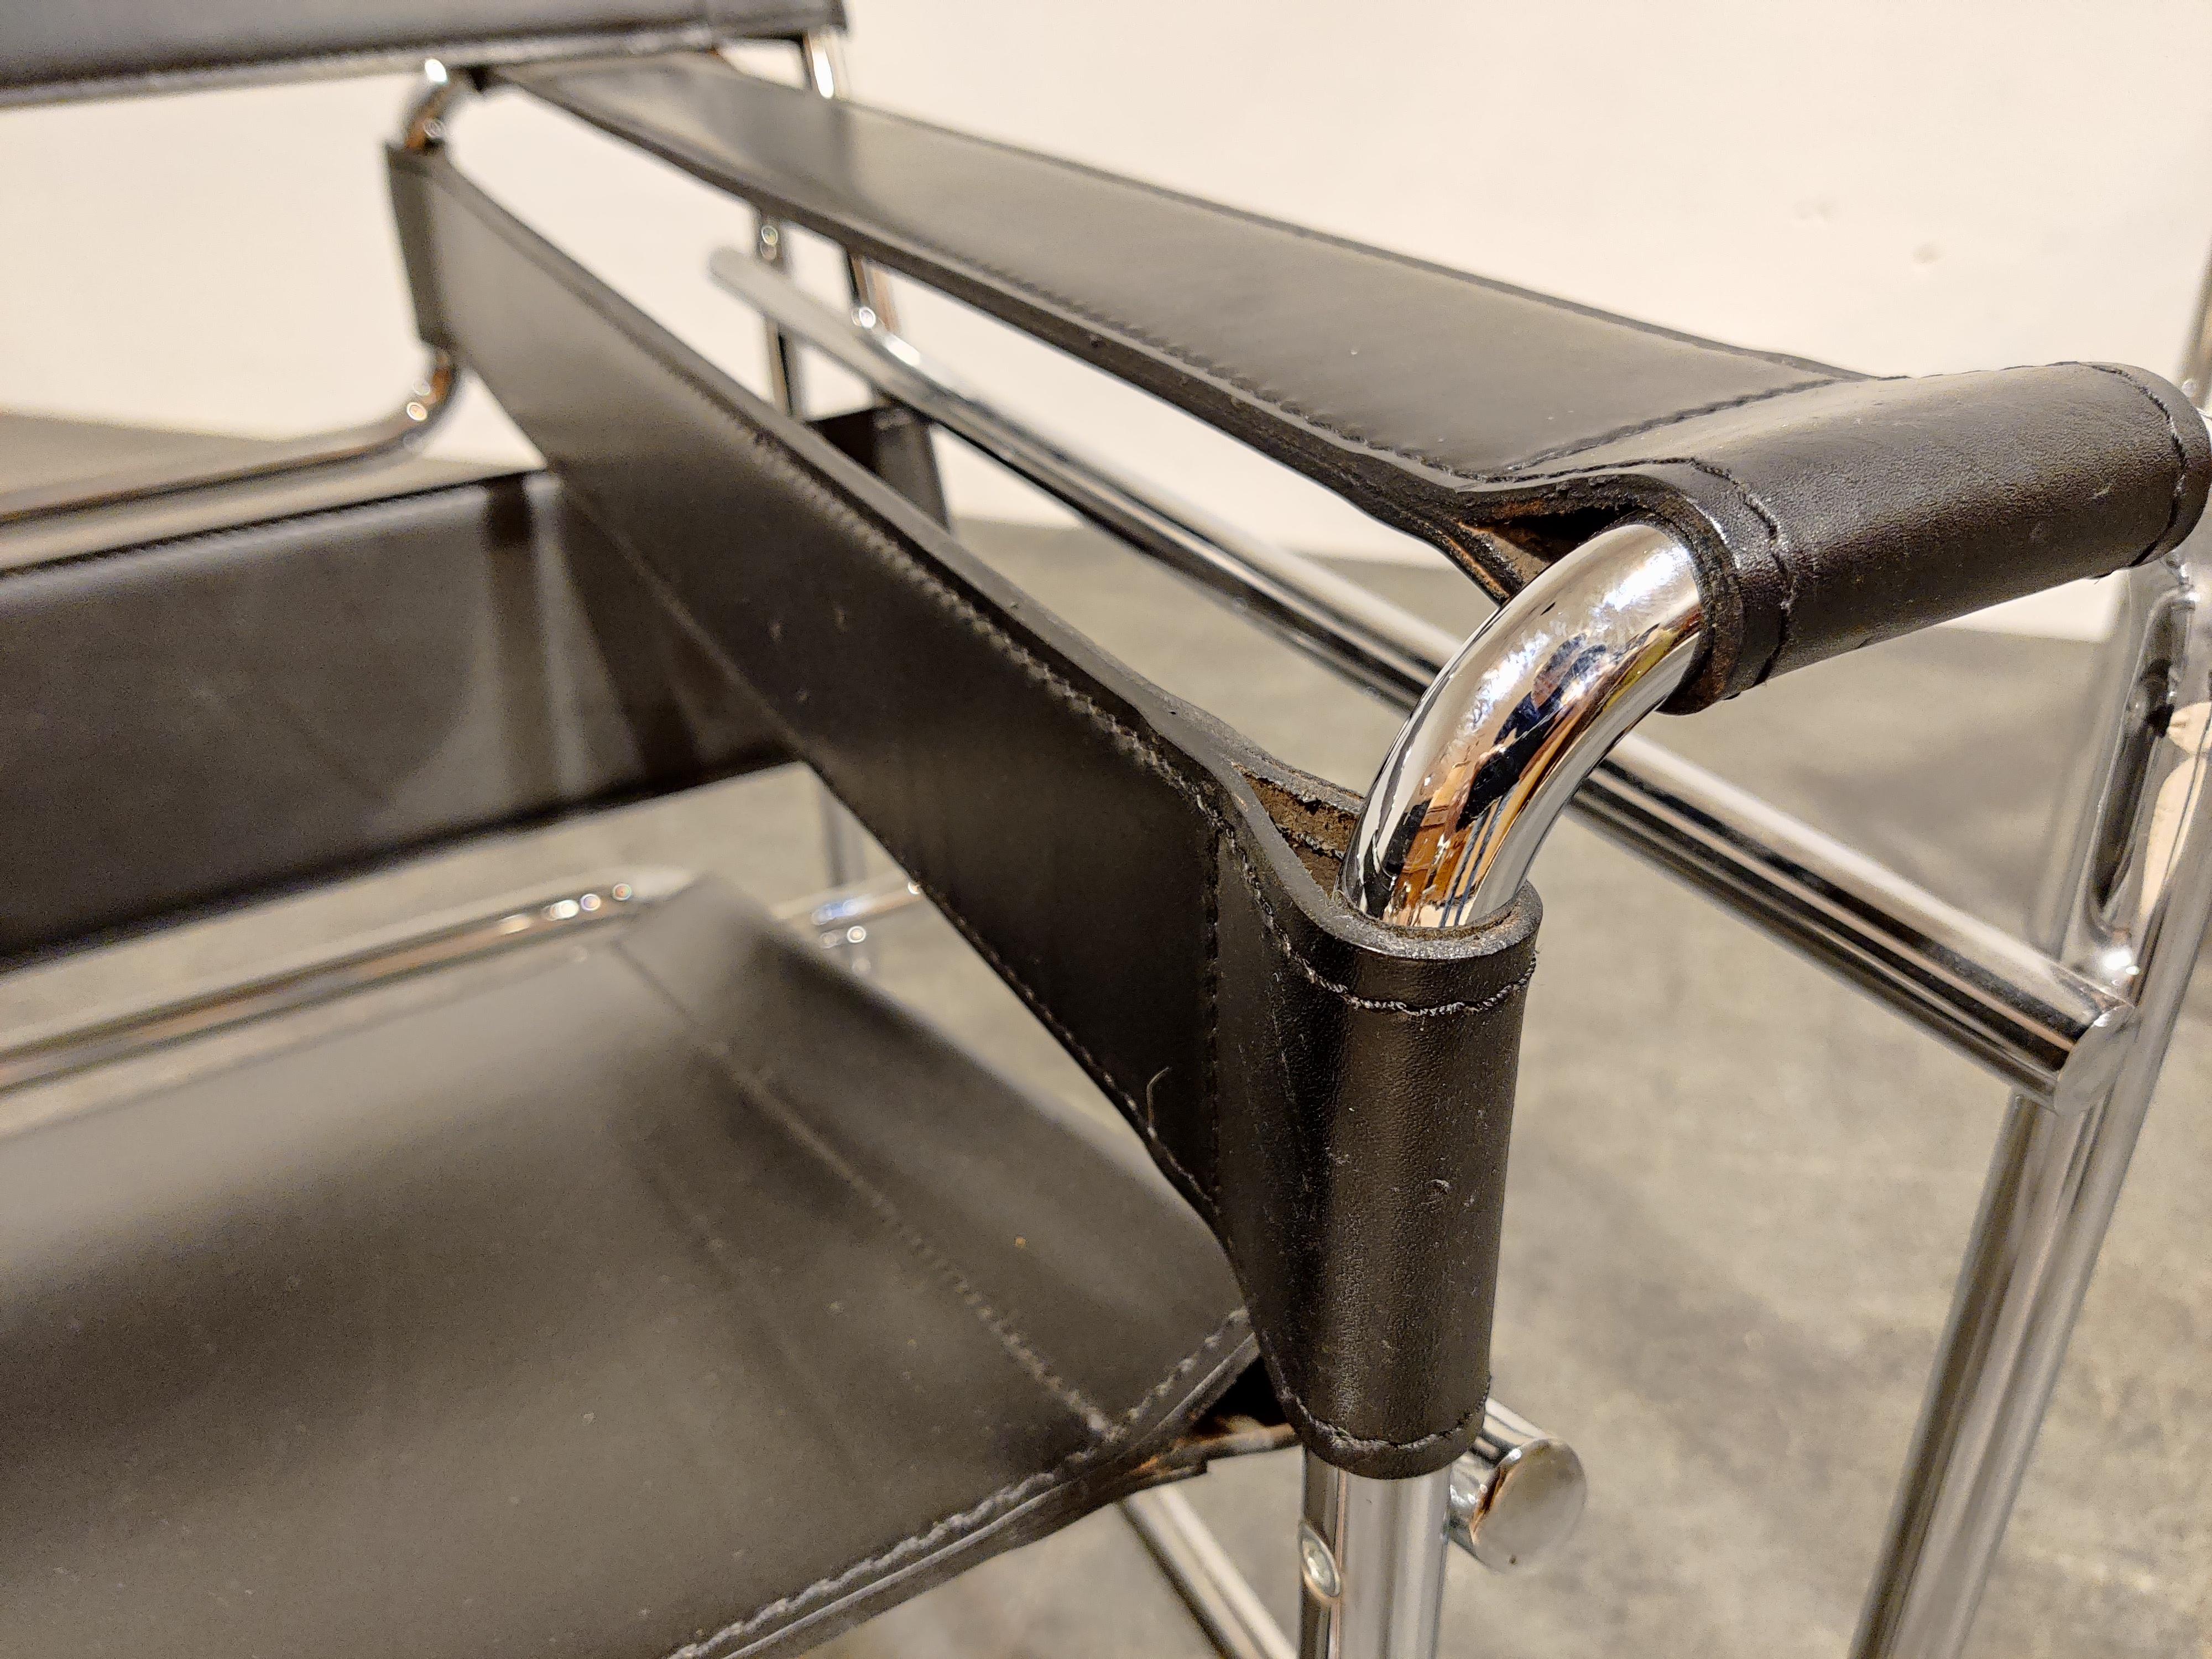 Pair of pristine bauhaus design tubular chrome and strong black leather armchairs 'Wassily' designed by Marcel Breuer in the 1920s.

These example date from the 1990s, have finished caps and are of very good quality. Unknown edition.

Price is